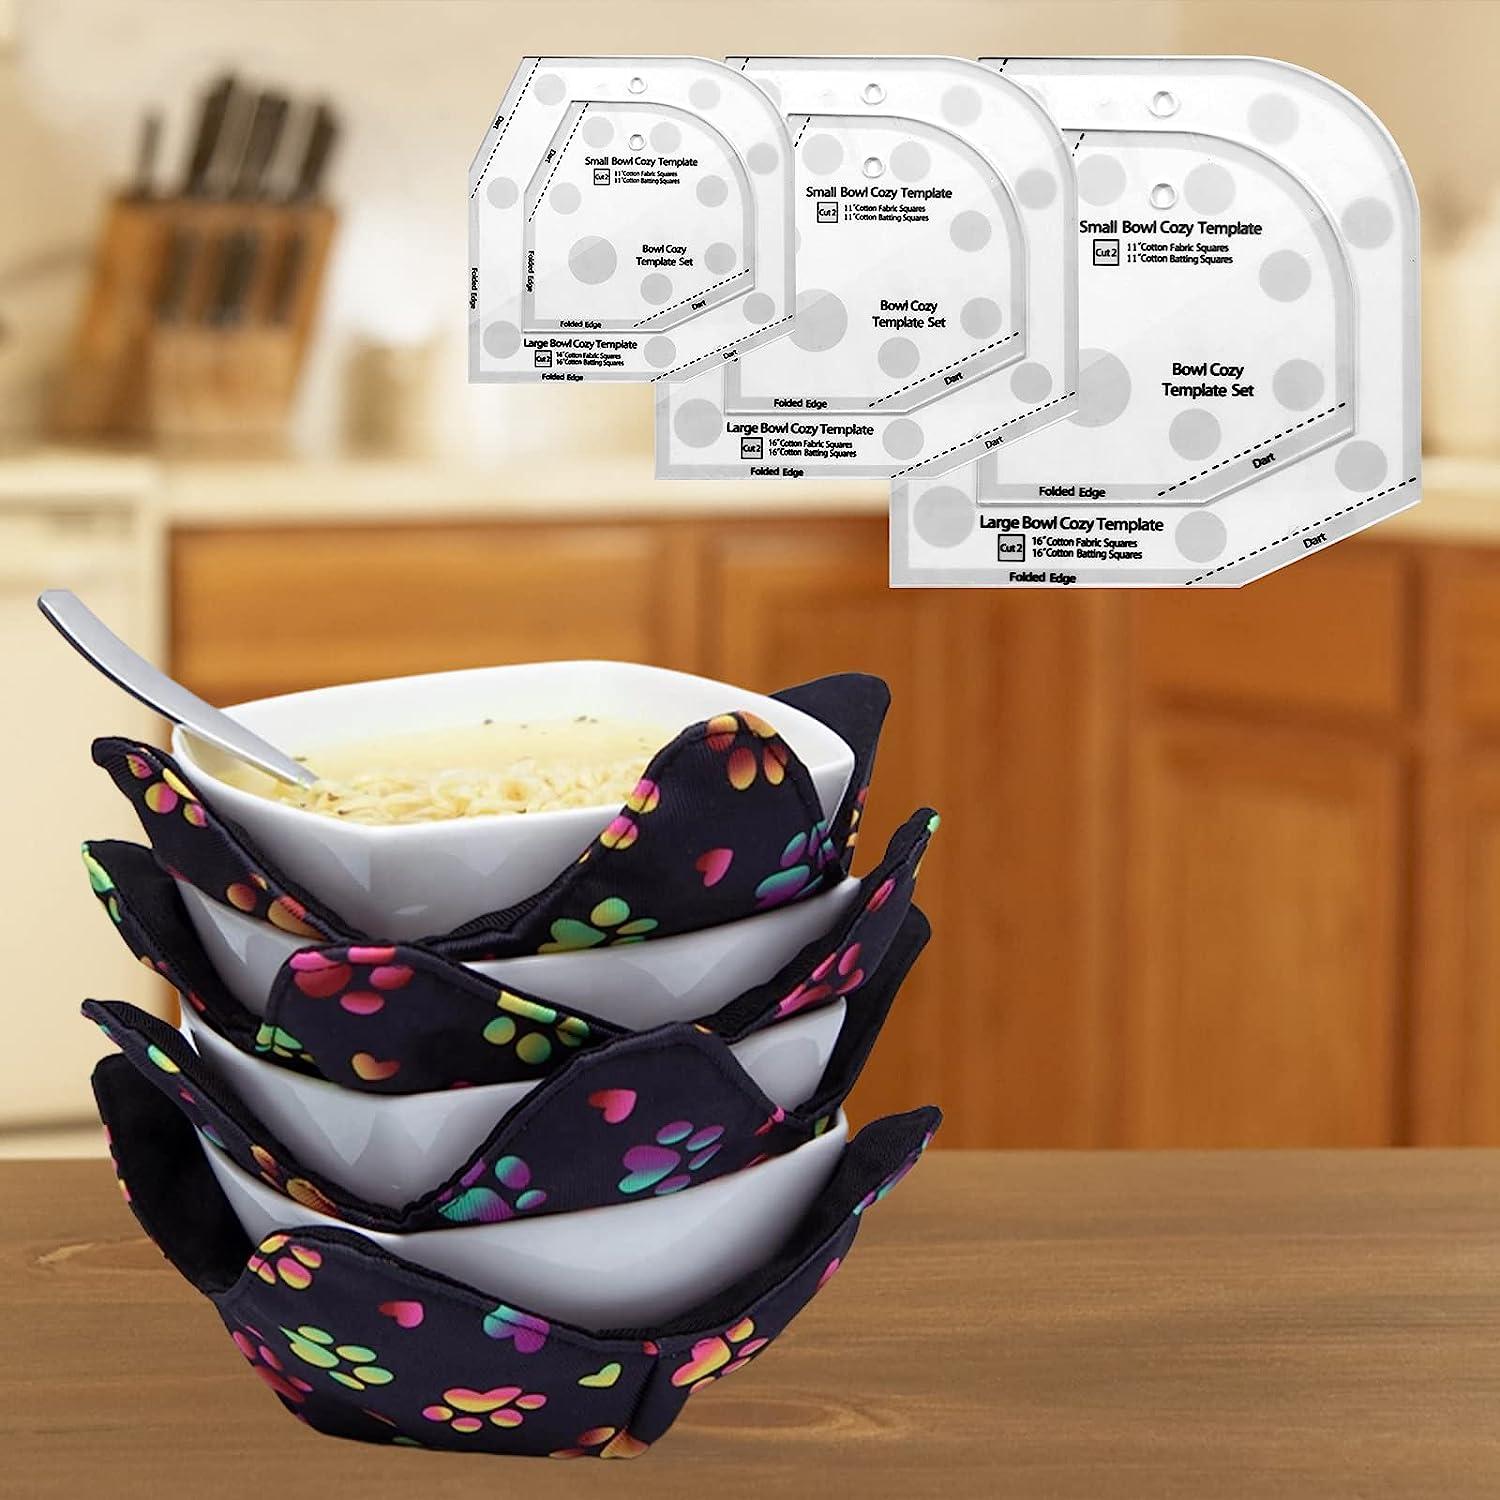 Bowl Cozy Template Stock Illustrations – 121 Bowl Cozy Template